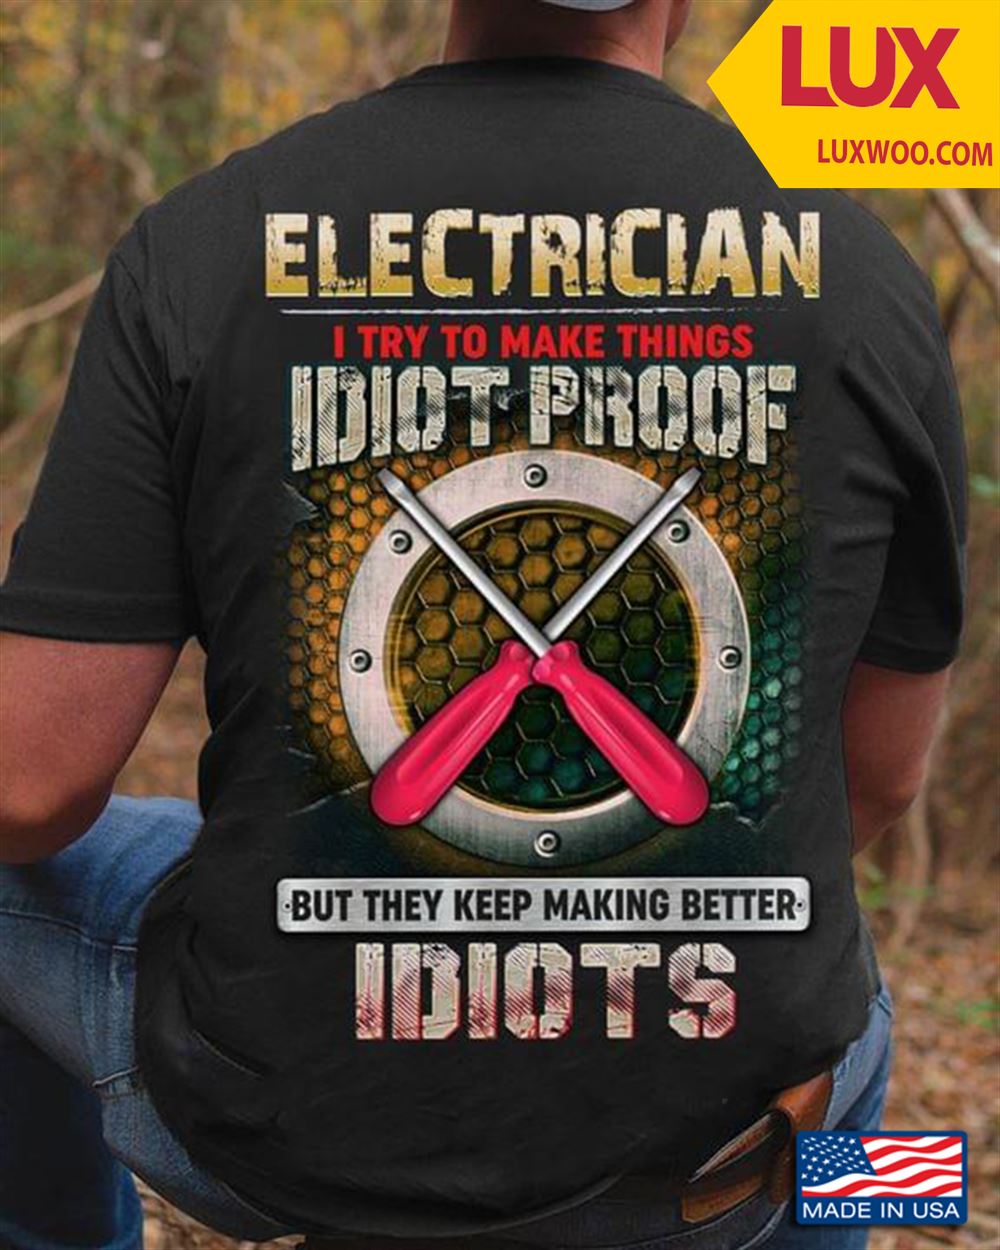 Electrician I Try To Make Things Idiot Proof But They Keep Making Better Idiots Tshirt Size Up To 5xl